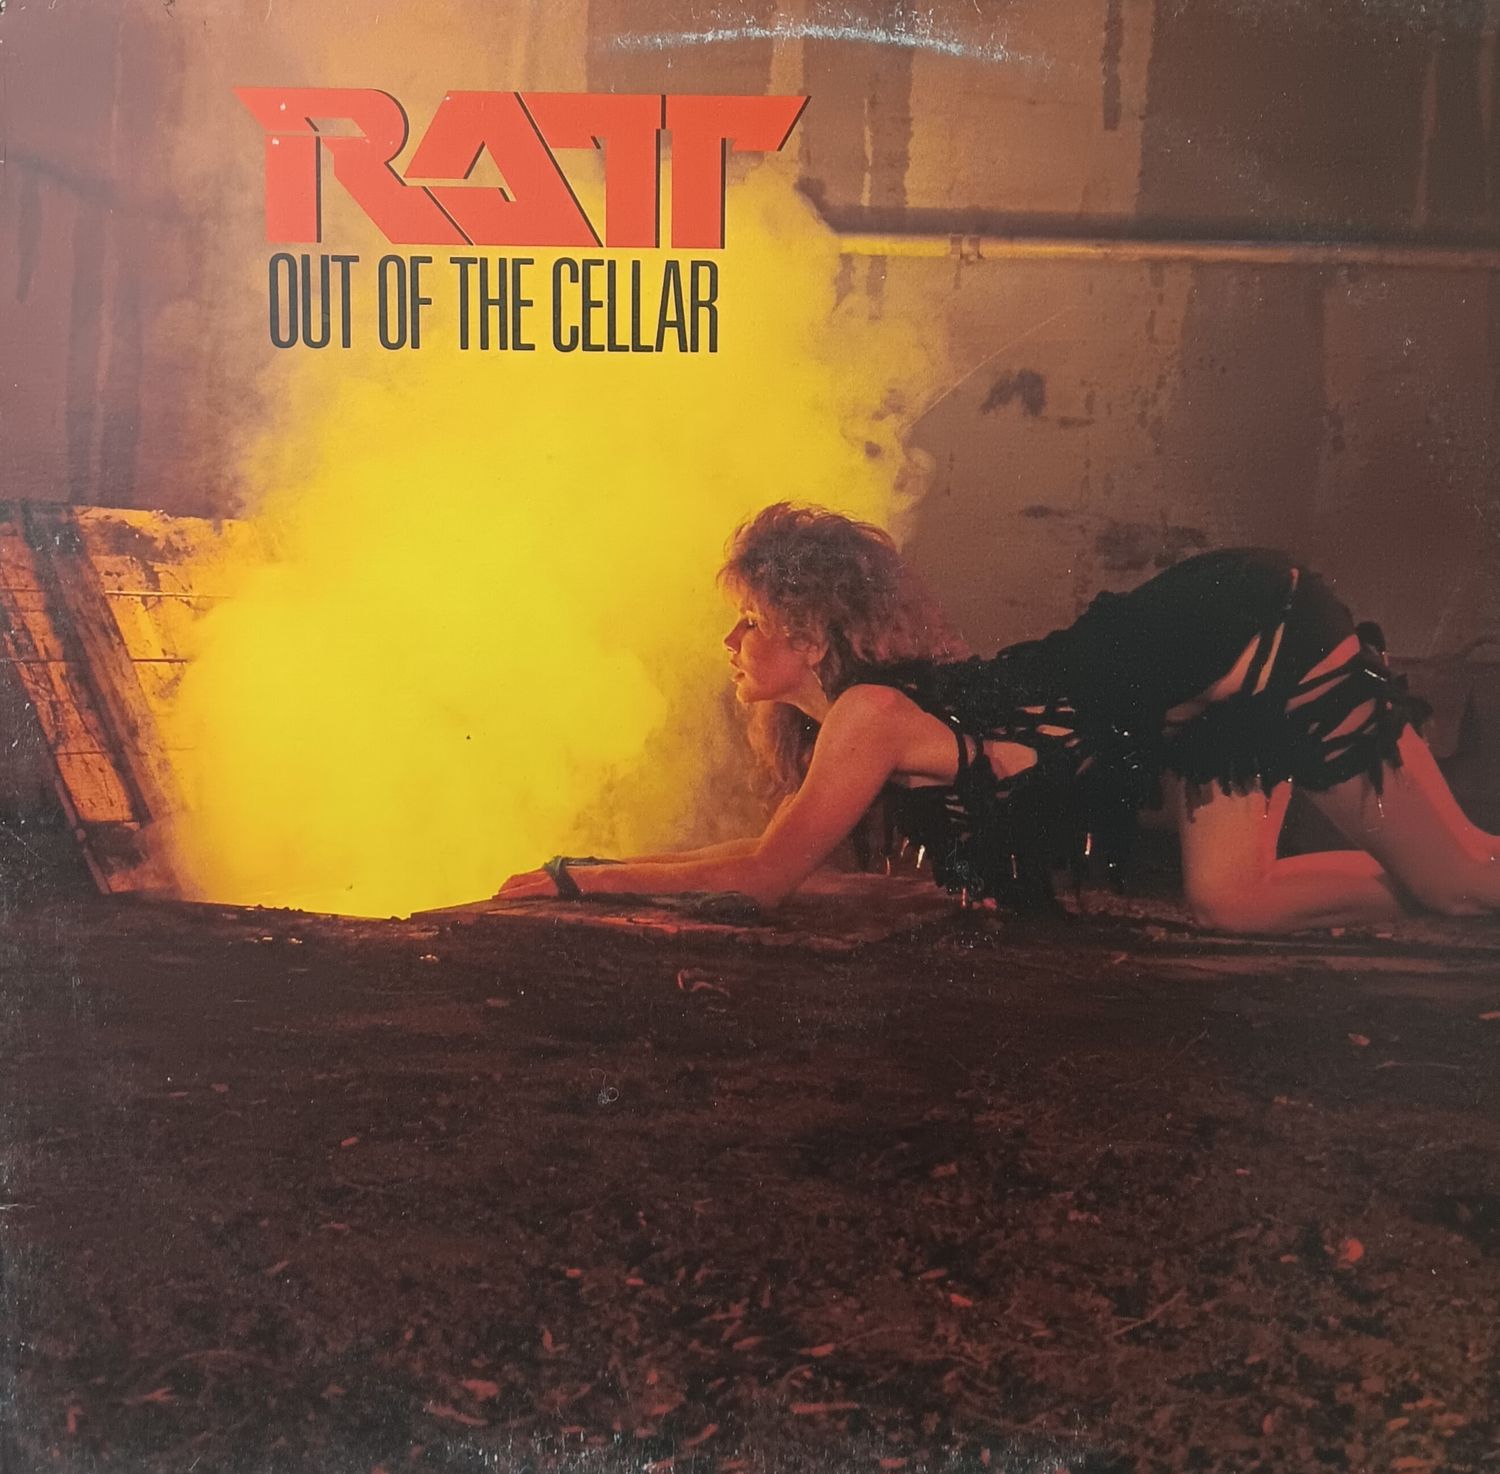 RATT - Out of the cellar